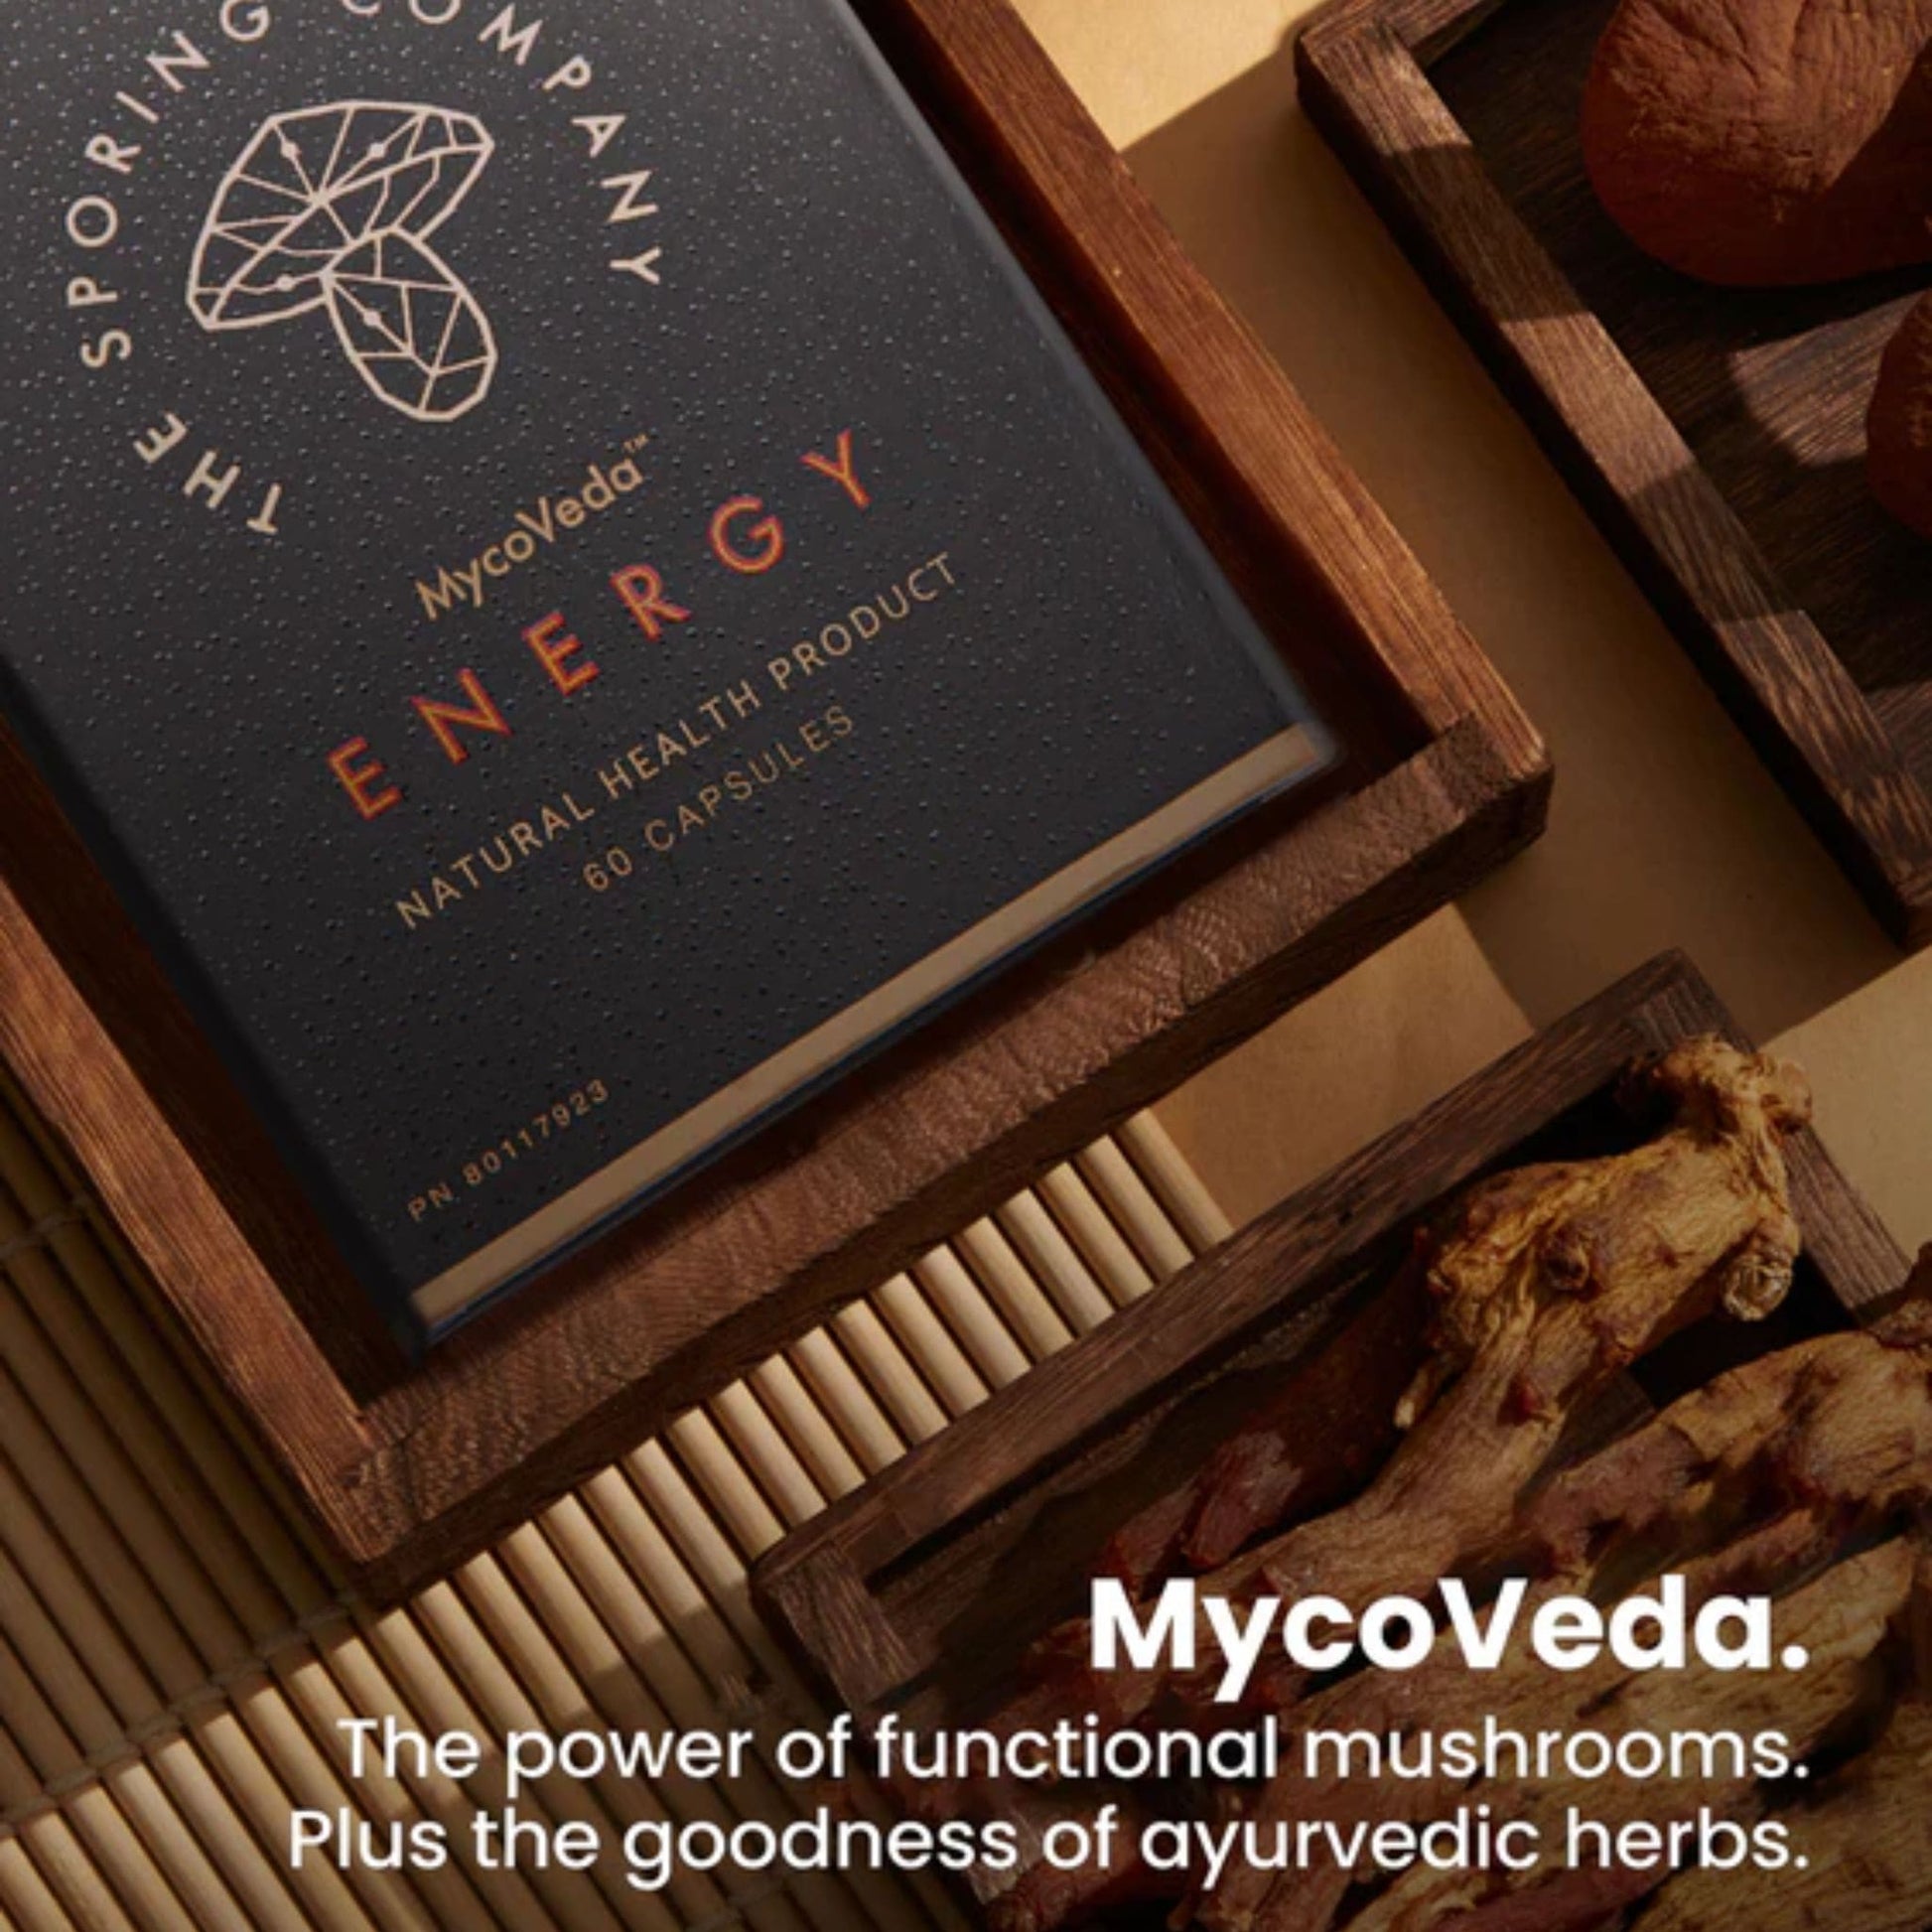 60 Vegetable Capsules | The Sporing Company Mycoveda Energy